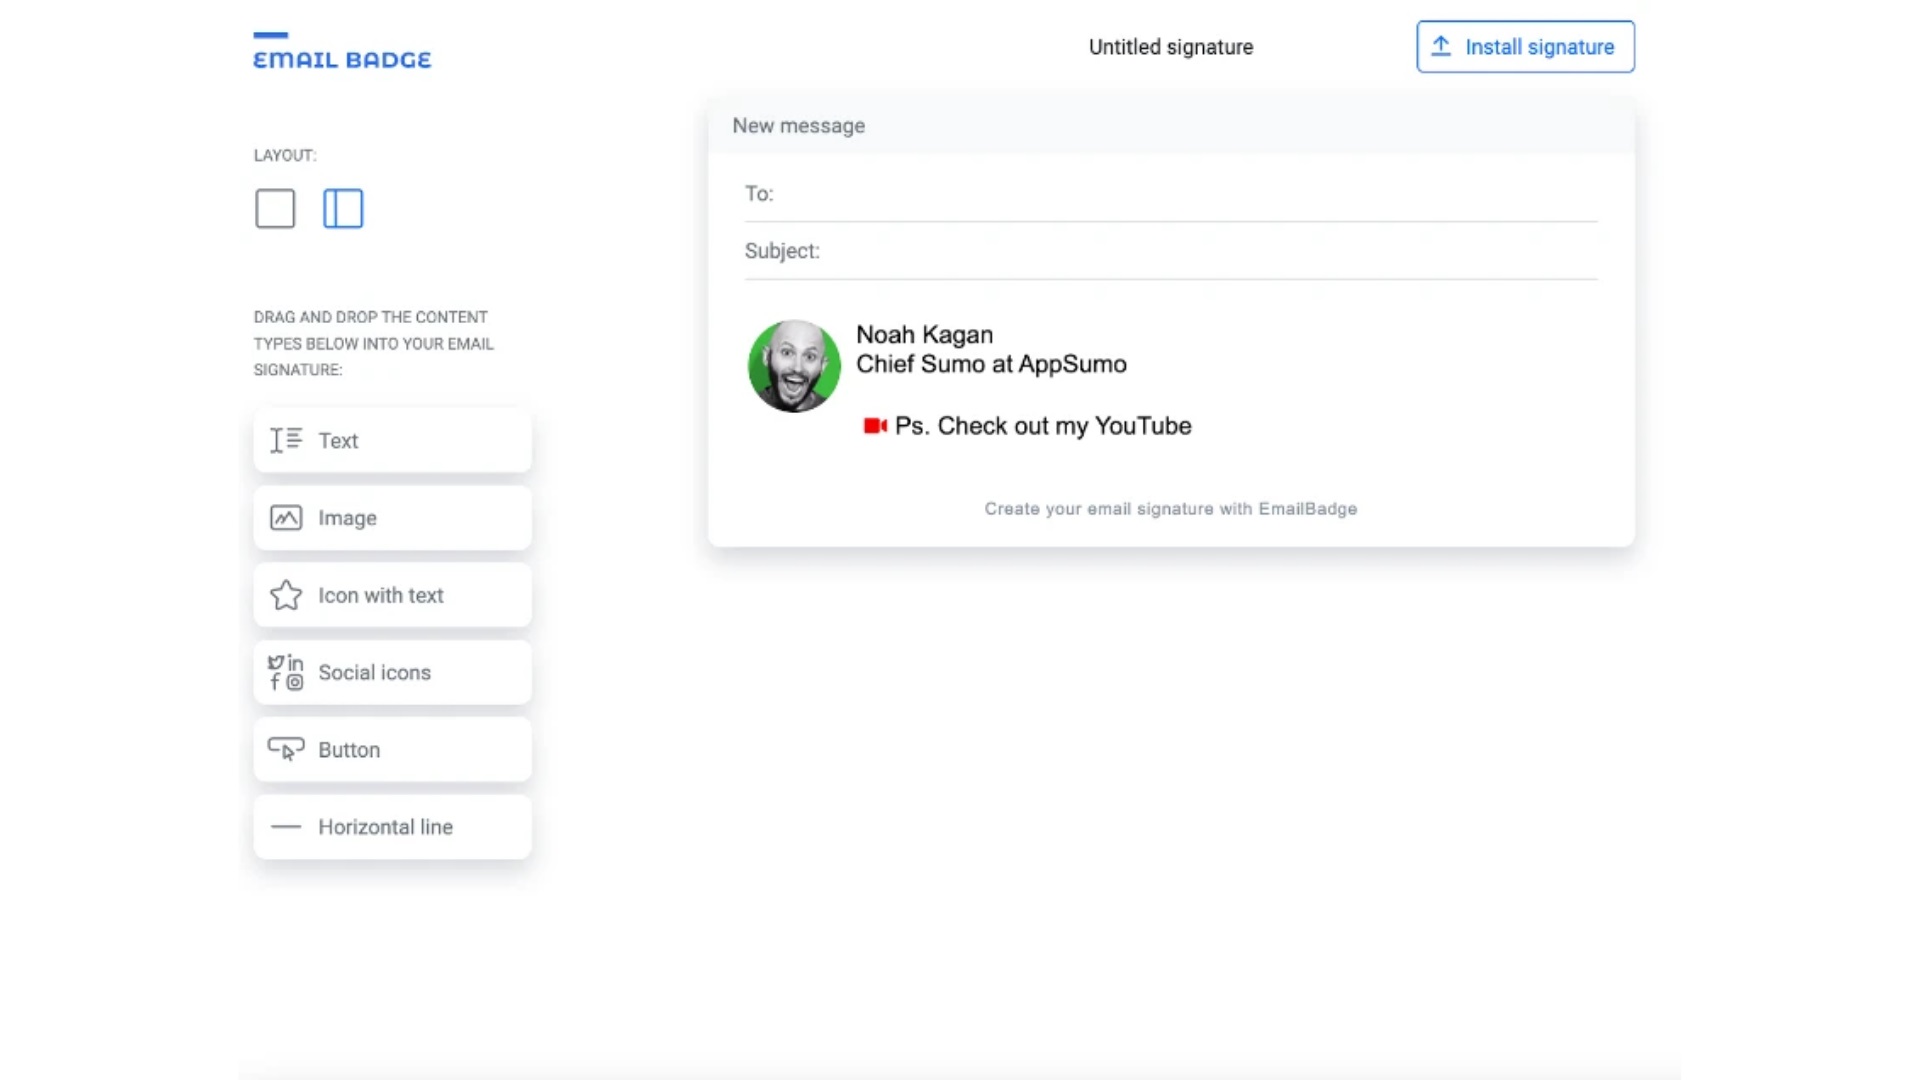 Get feedback from a vast remote working audience about EmailBadge